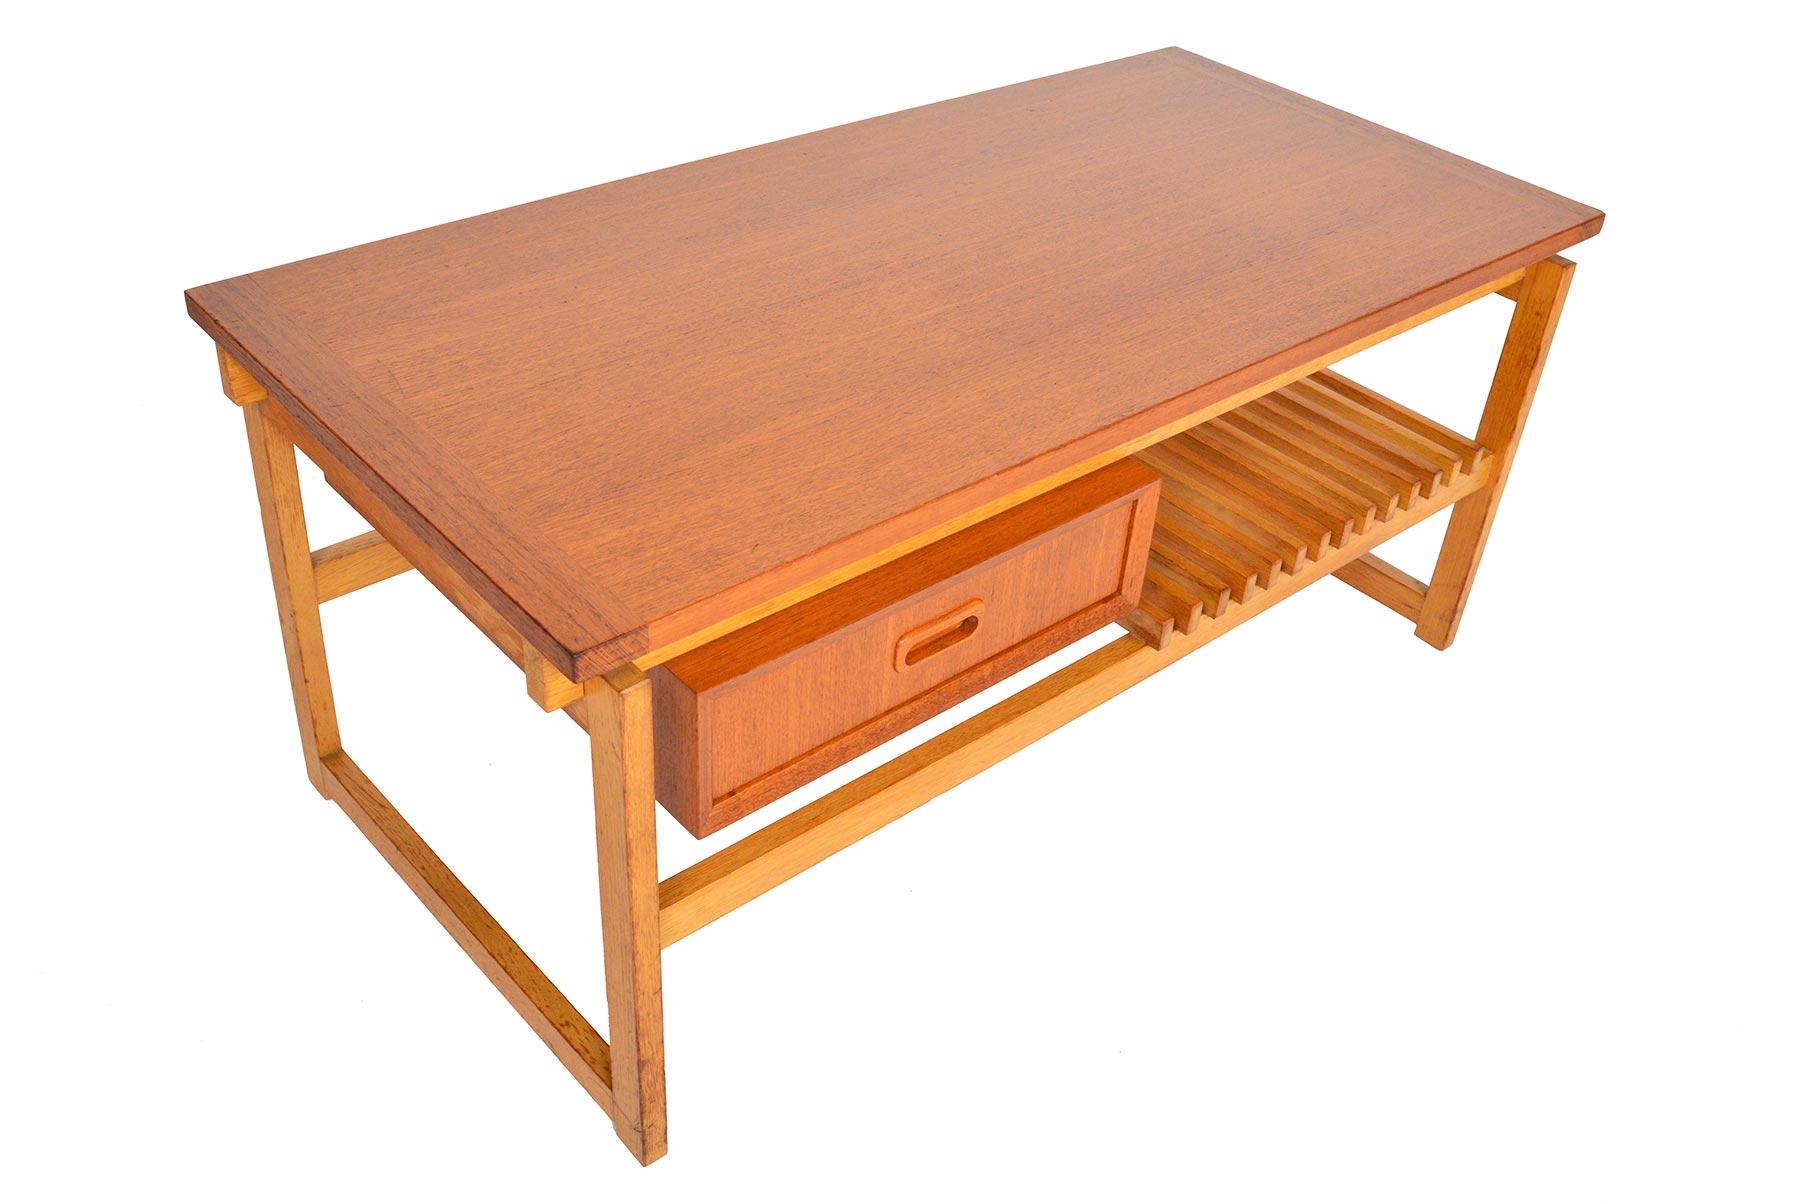 This Swedish modern midcentury coffee table in teak and oak is beautifully designed. The teak top is supported by an oak sleigh base. A single drawer in teak sits beneath the tabletop. A slatted oak rack runs the bottom of the table and offers